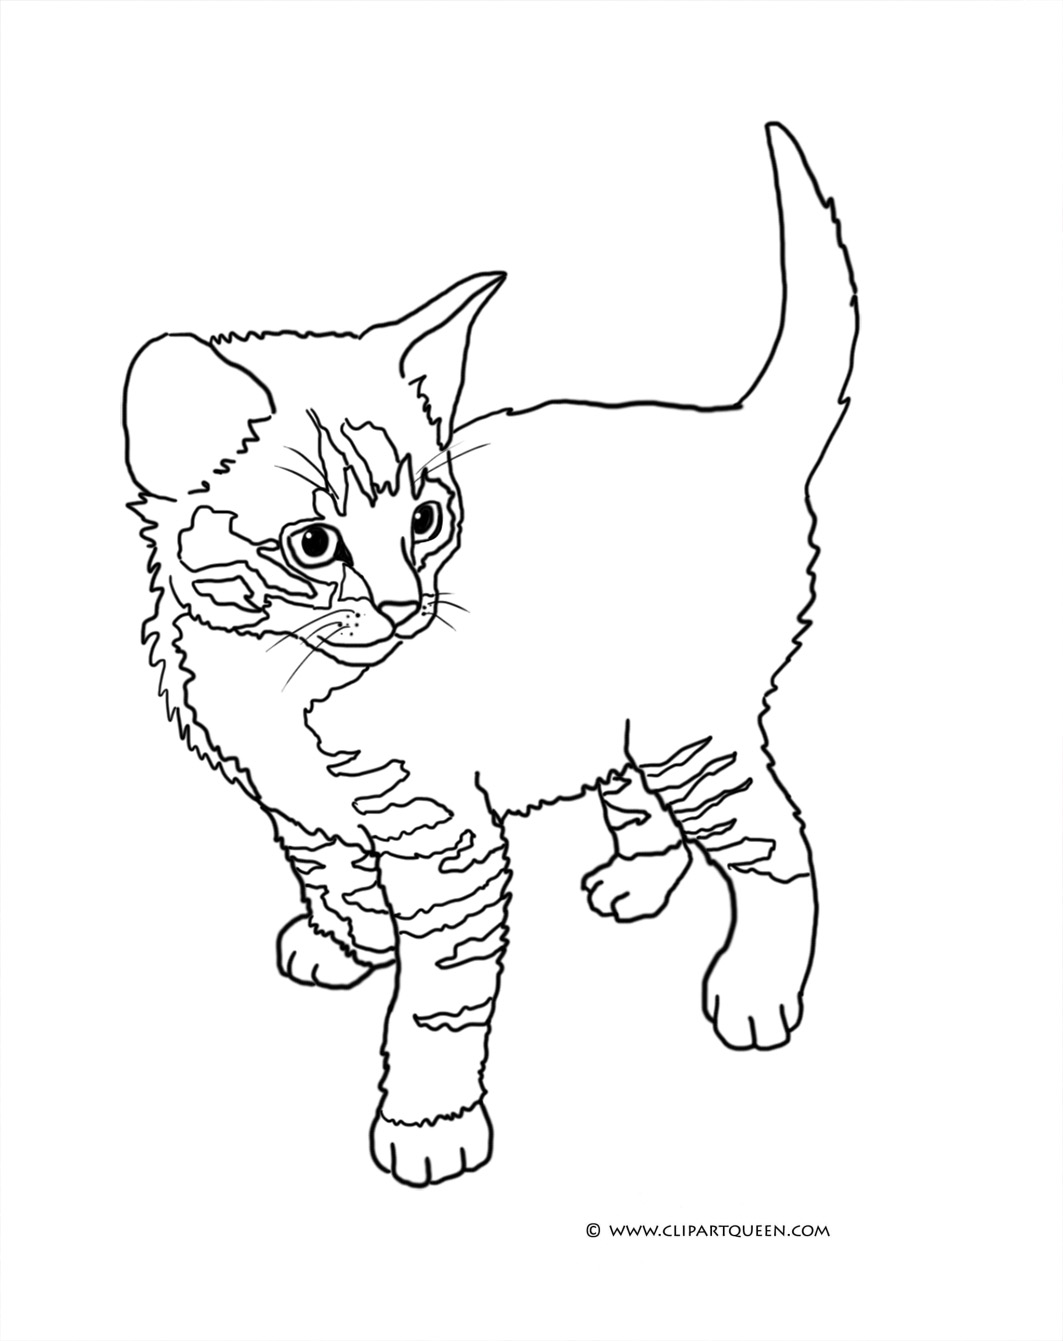 Coloring Pages : Tabby Kitten Standing Coloring Pages Cat ...